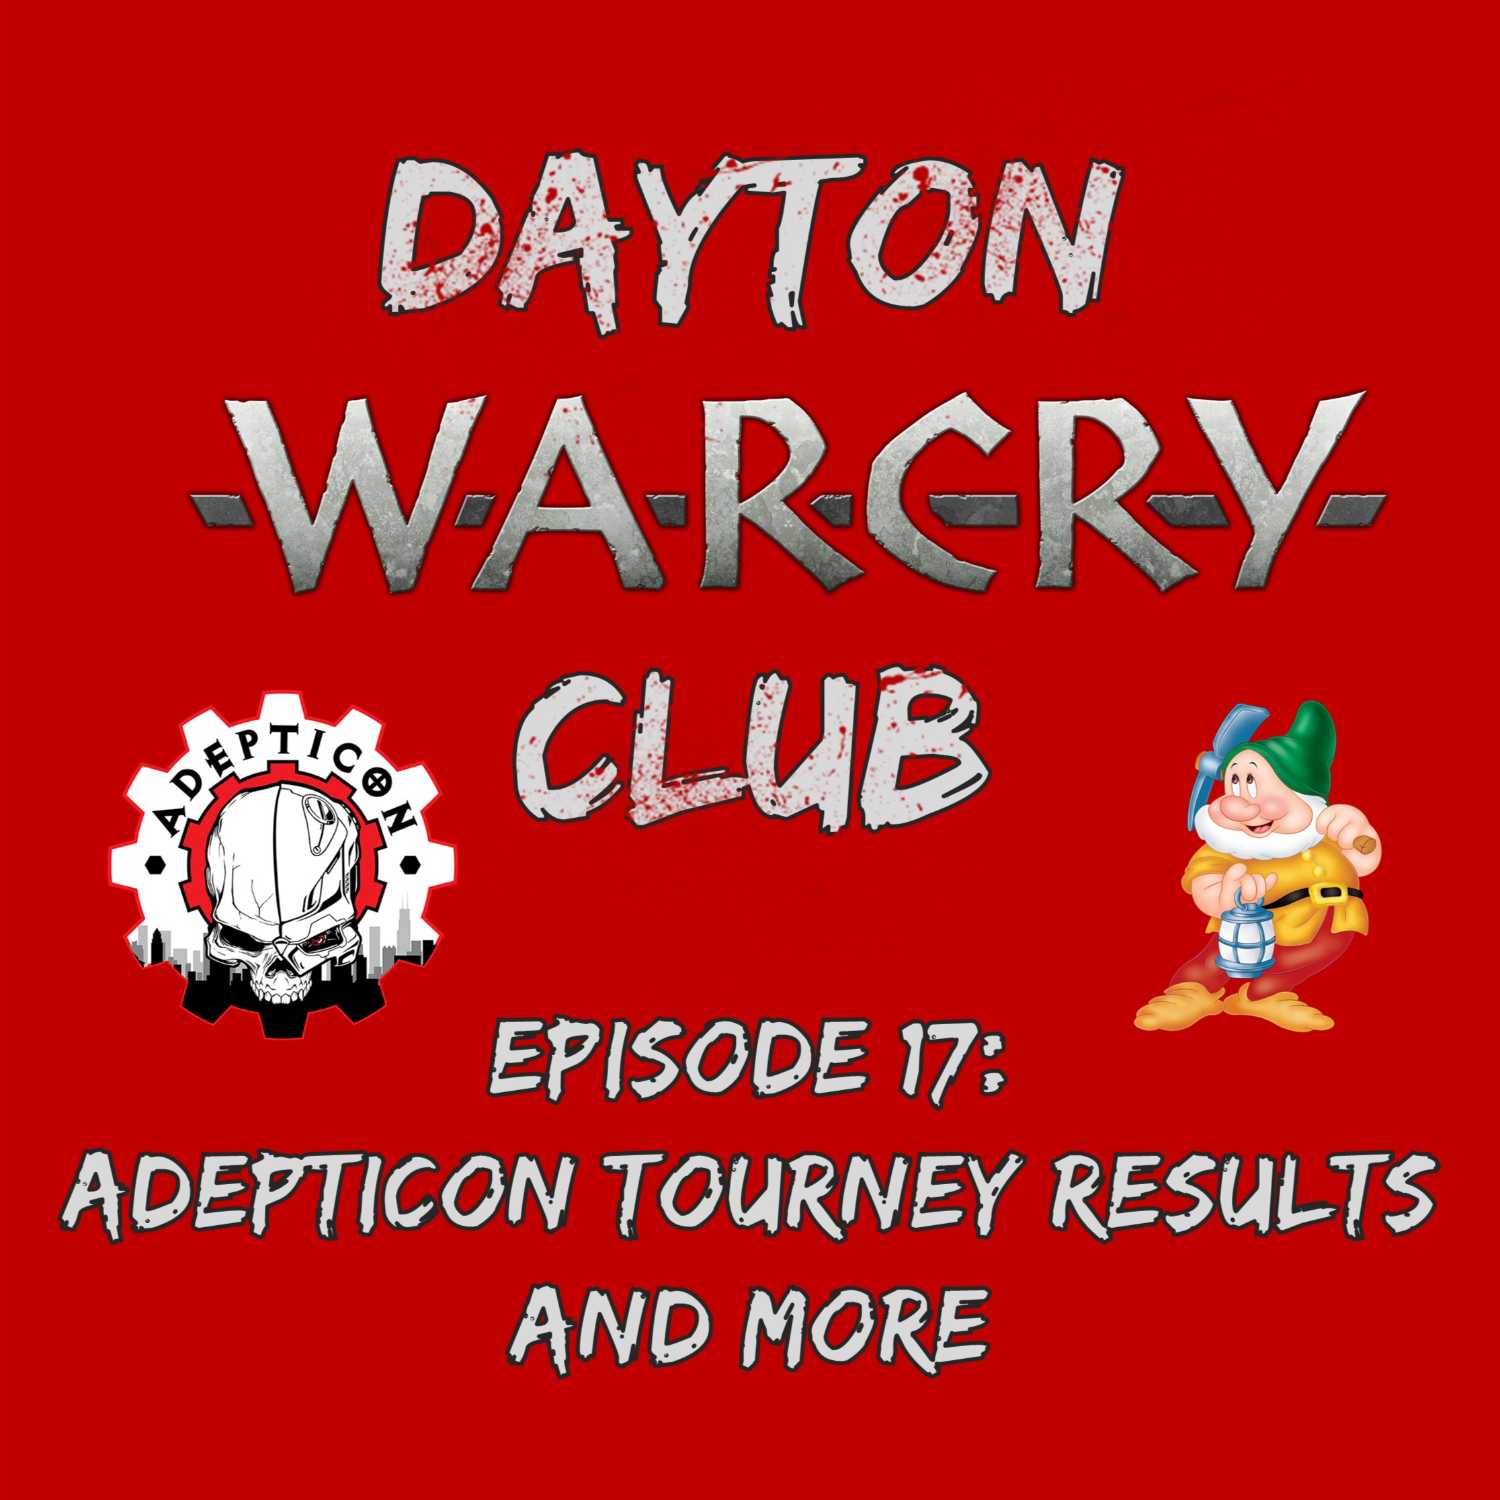 Dayton Warcry Club Episode 17: Adepticon Tourney Results & More!